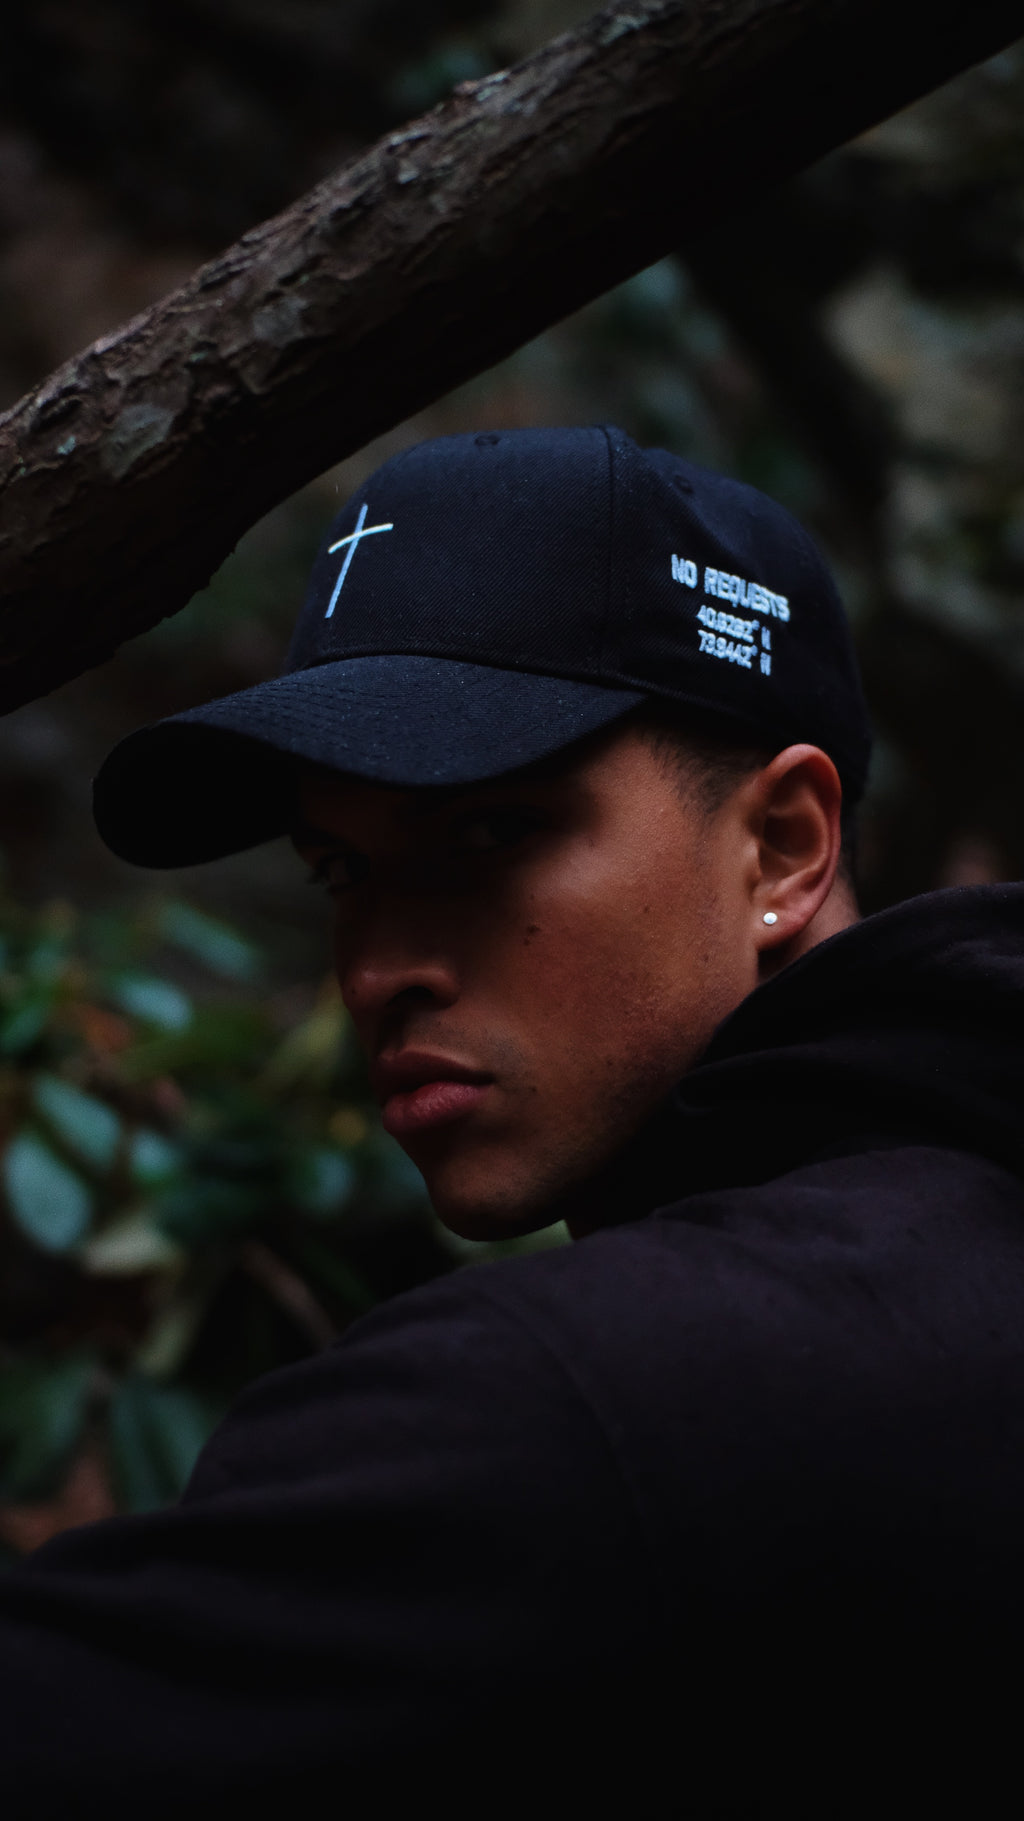 Embroidered Cross Structured 6 Panel Unisex Dad Hat. Adjustable Snapback So One Size Fits All